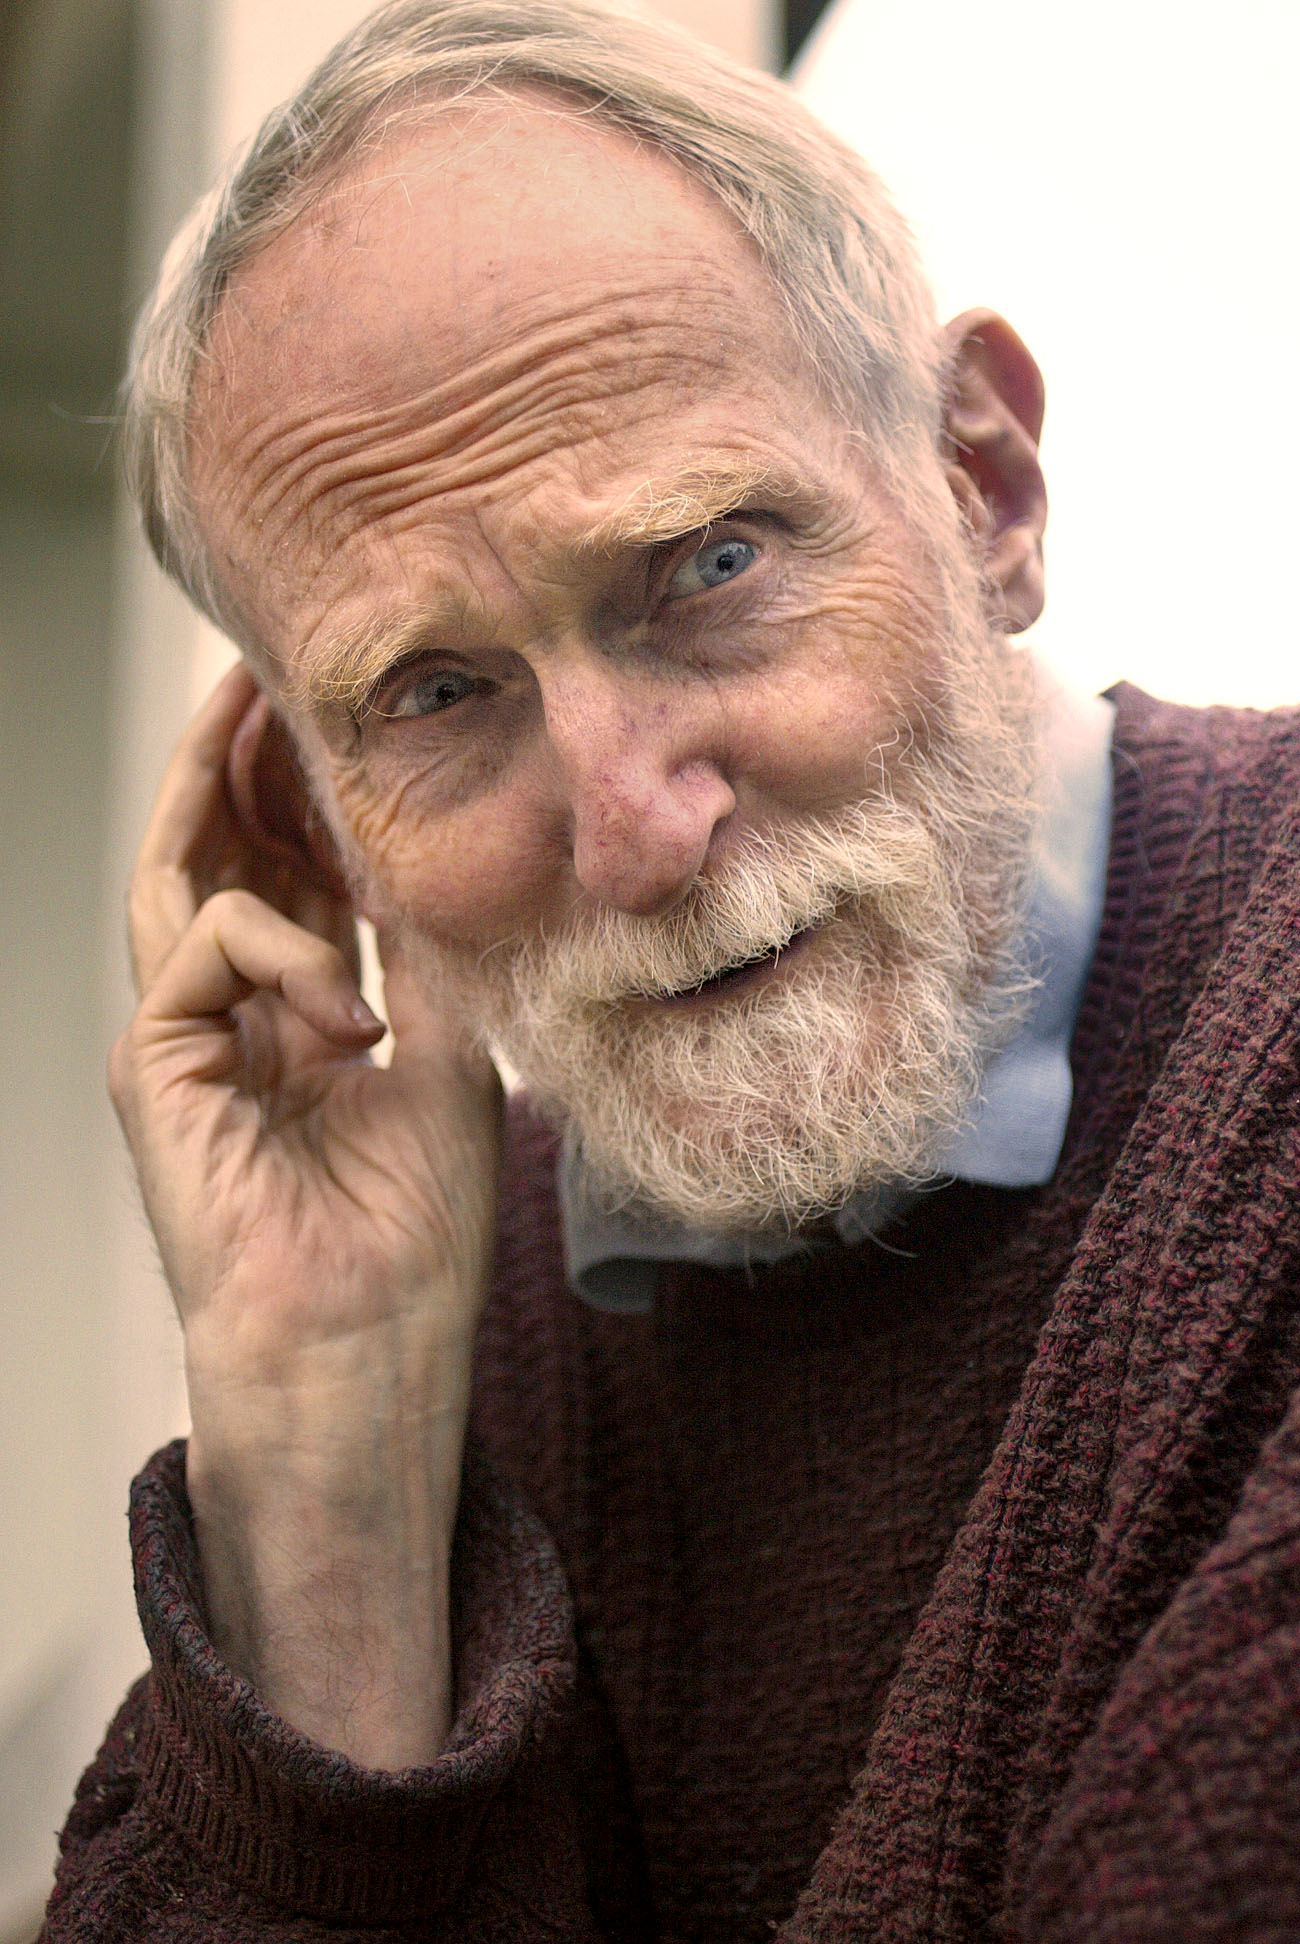 Roberts Blossom posing for a picture in 2003. | Source: Getty Images